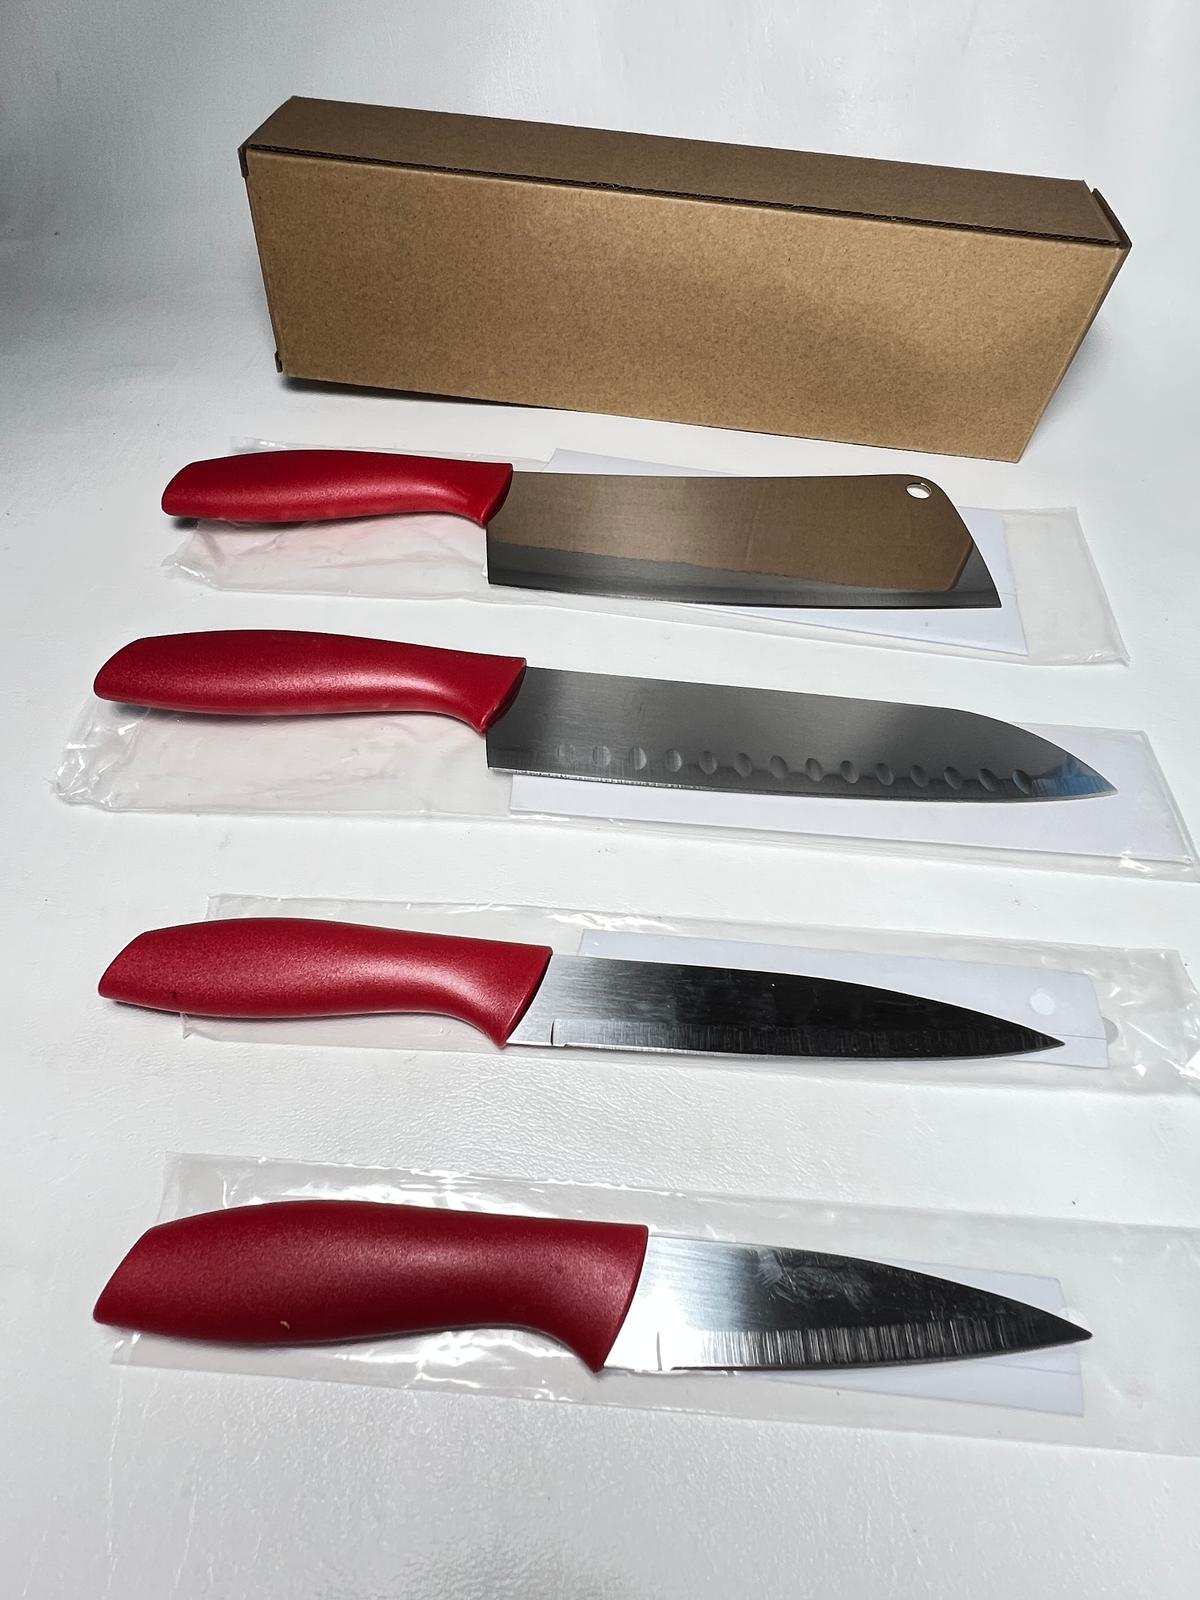 4 pc Red Handled Knife Set in Box